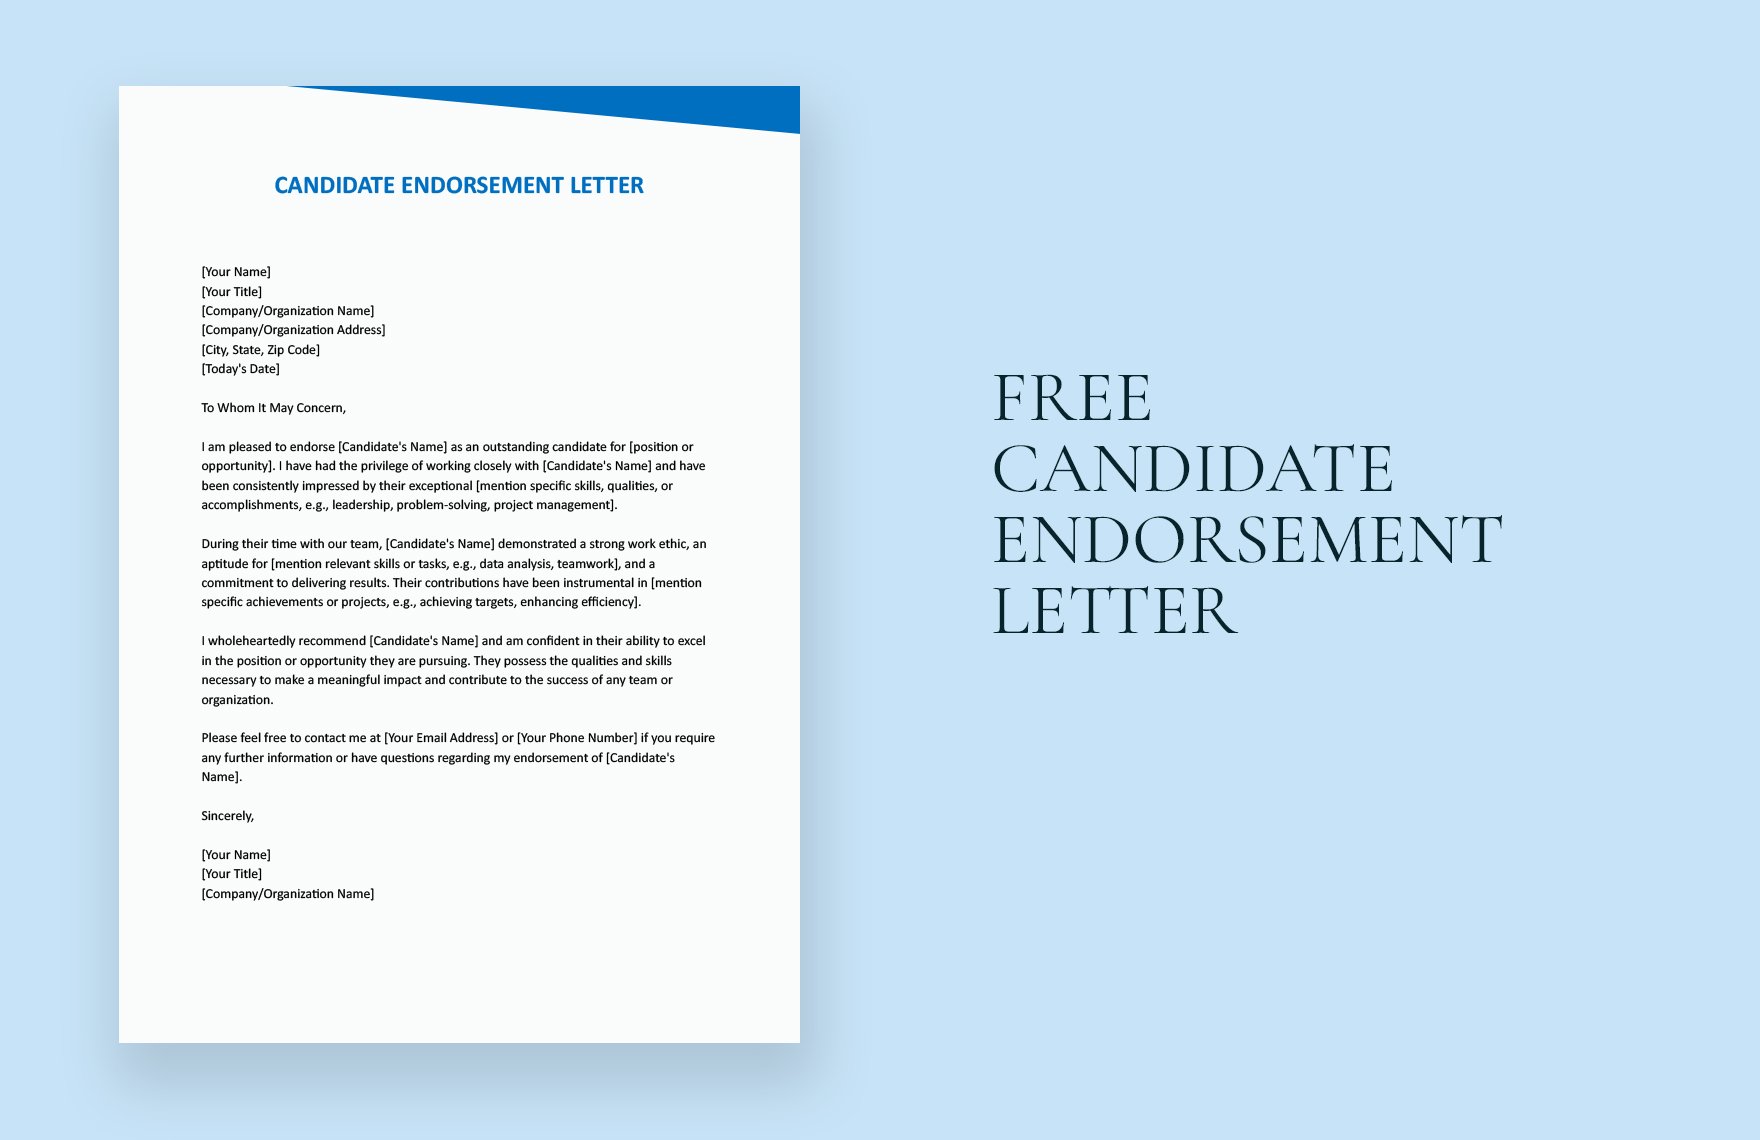 Candidate Endorsement Letter in Word, Google Docs